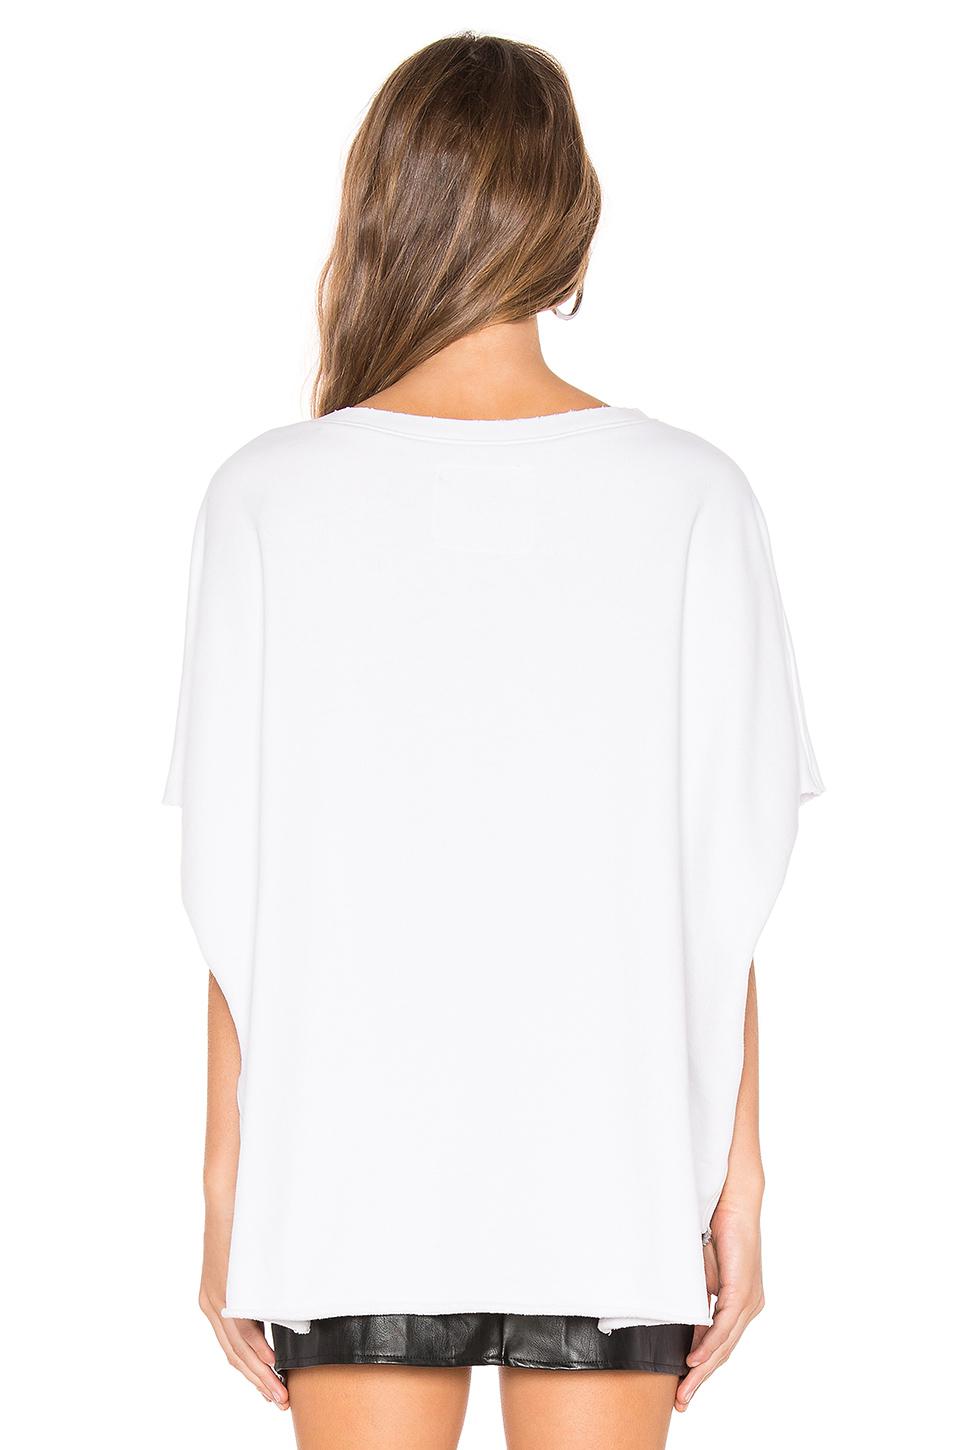 Frank Eileen Cotton Tee Lab Capelet In Dirty White White Lyst